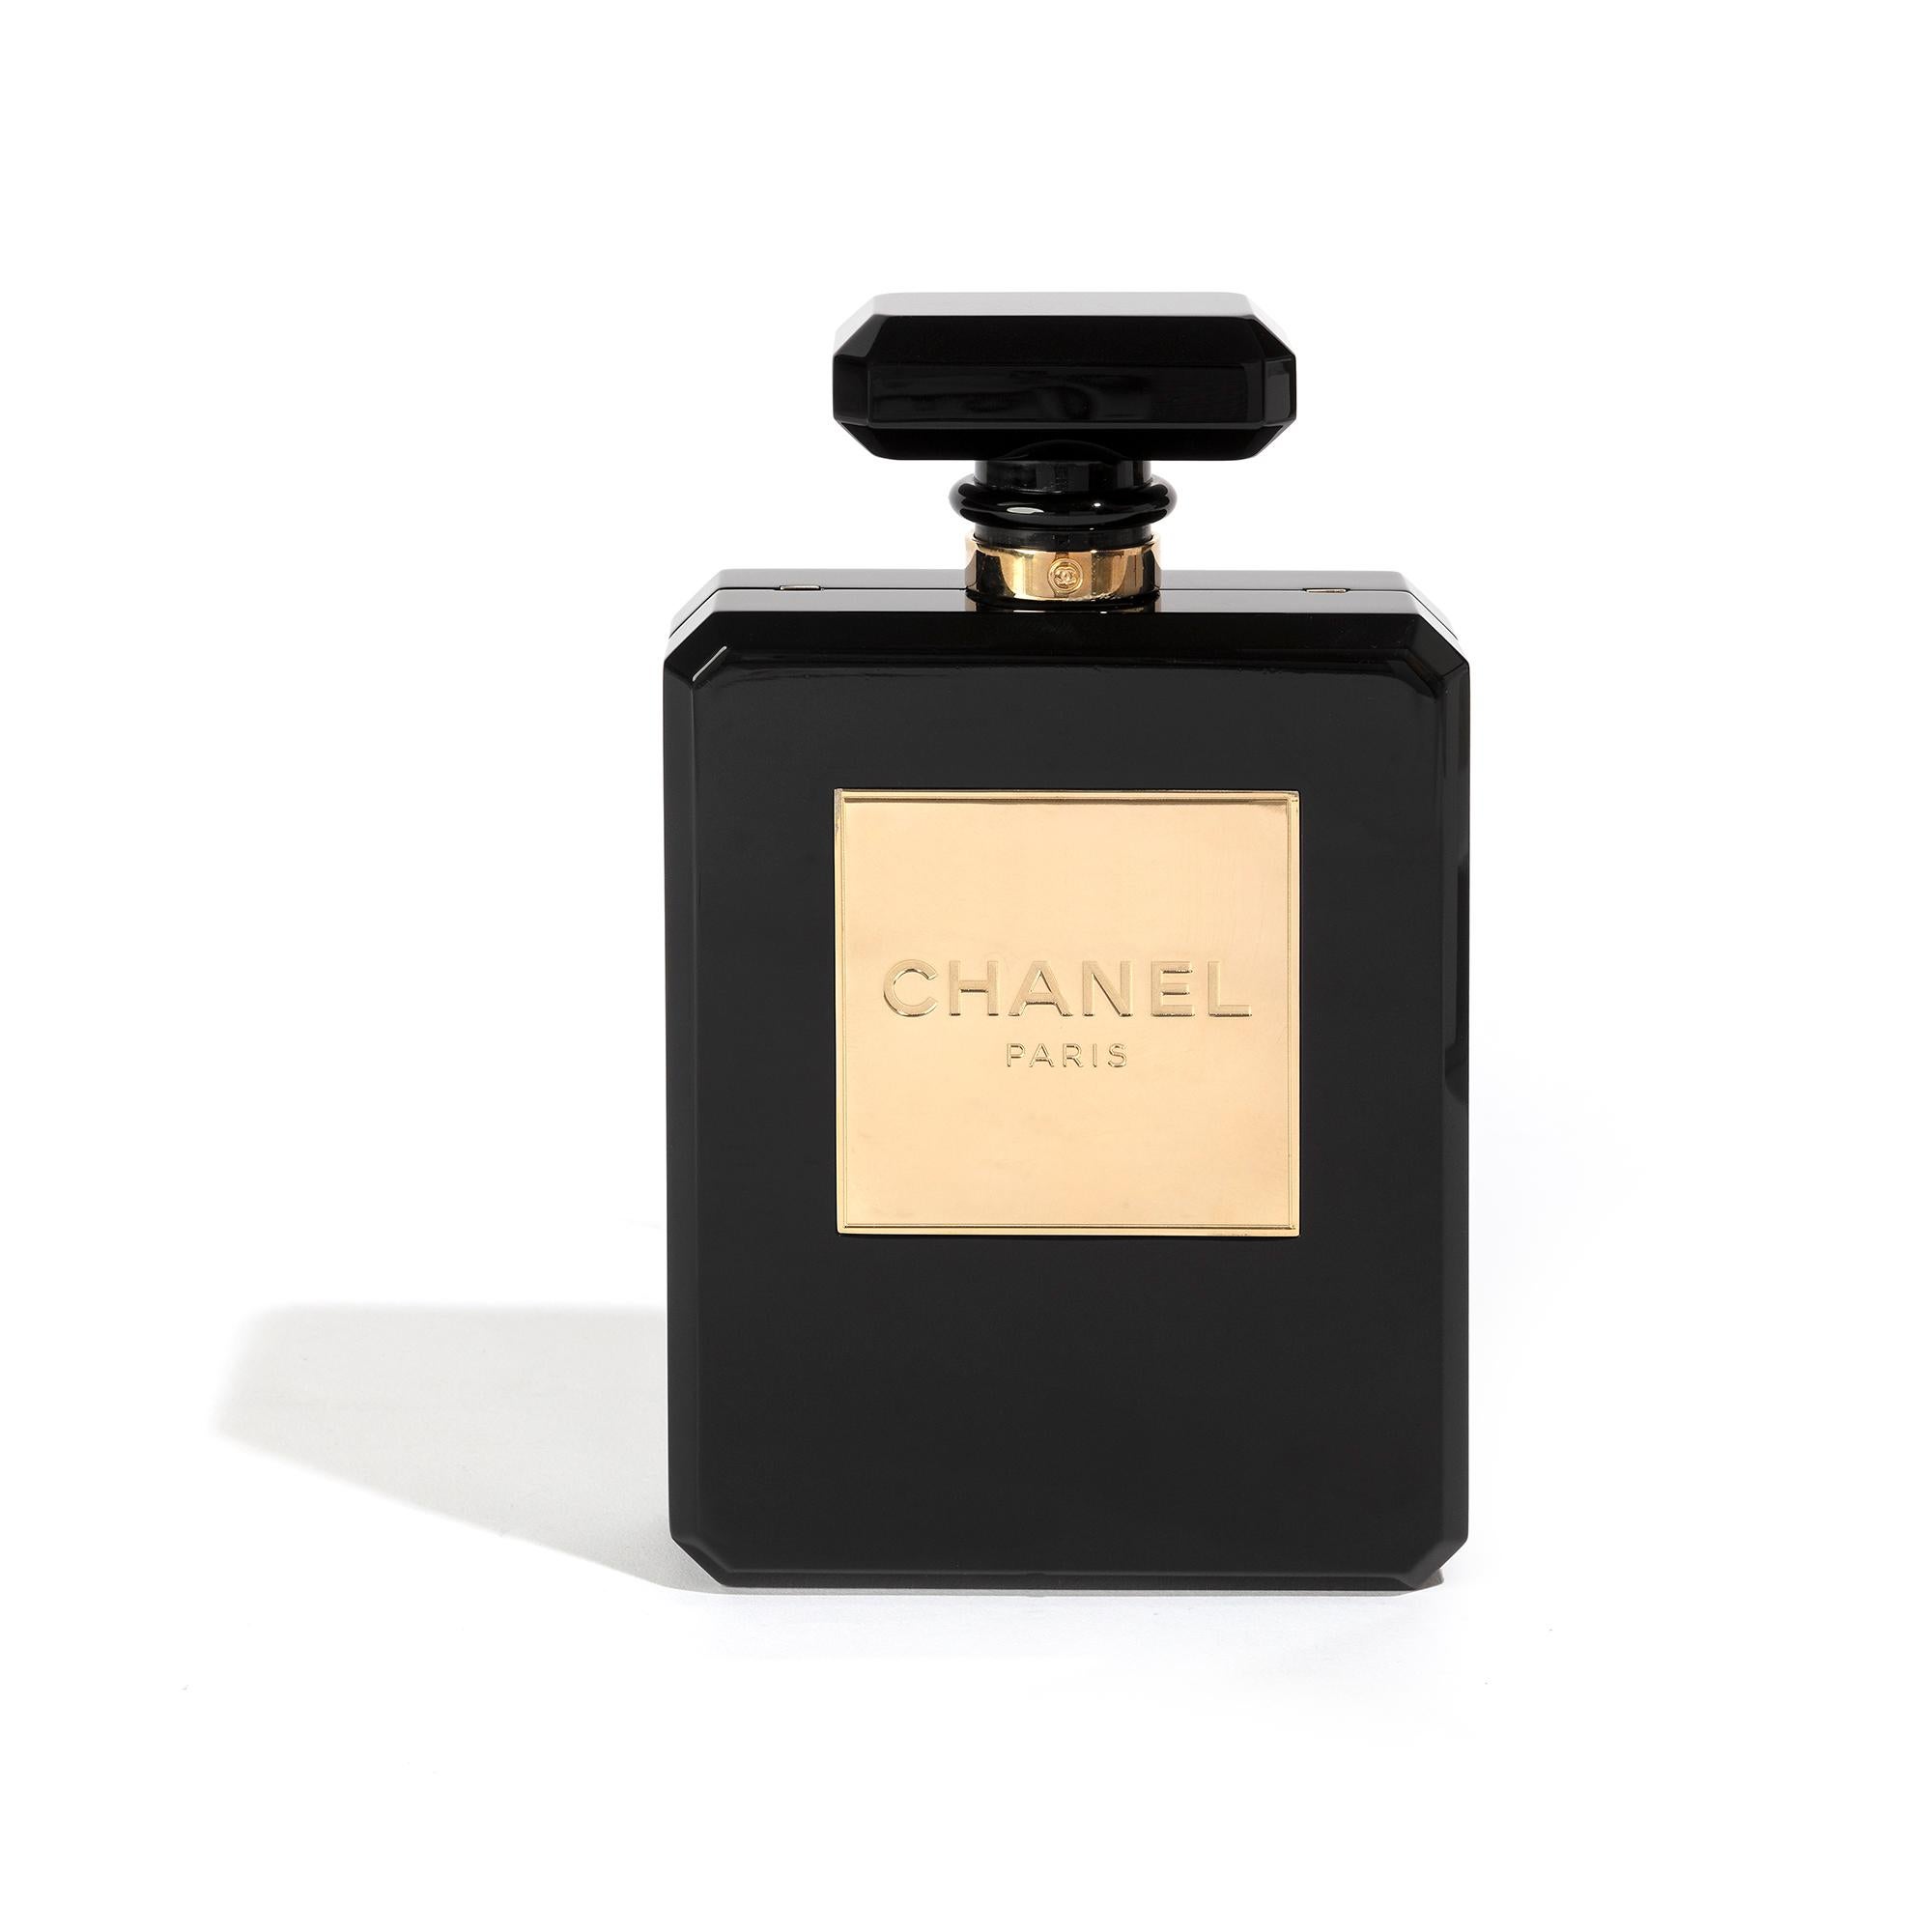 There are few symbols closer to the heart of the Chanel brand than a N5 perfume bottle. A rare collectors’ item, this Chanel N5 minaudière is crafted from black plexiglass, finished with pale gold-plated hardware, and a woven chain strap. A